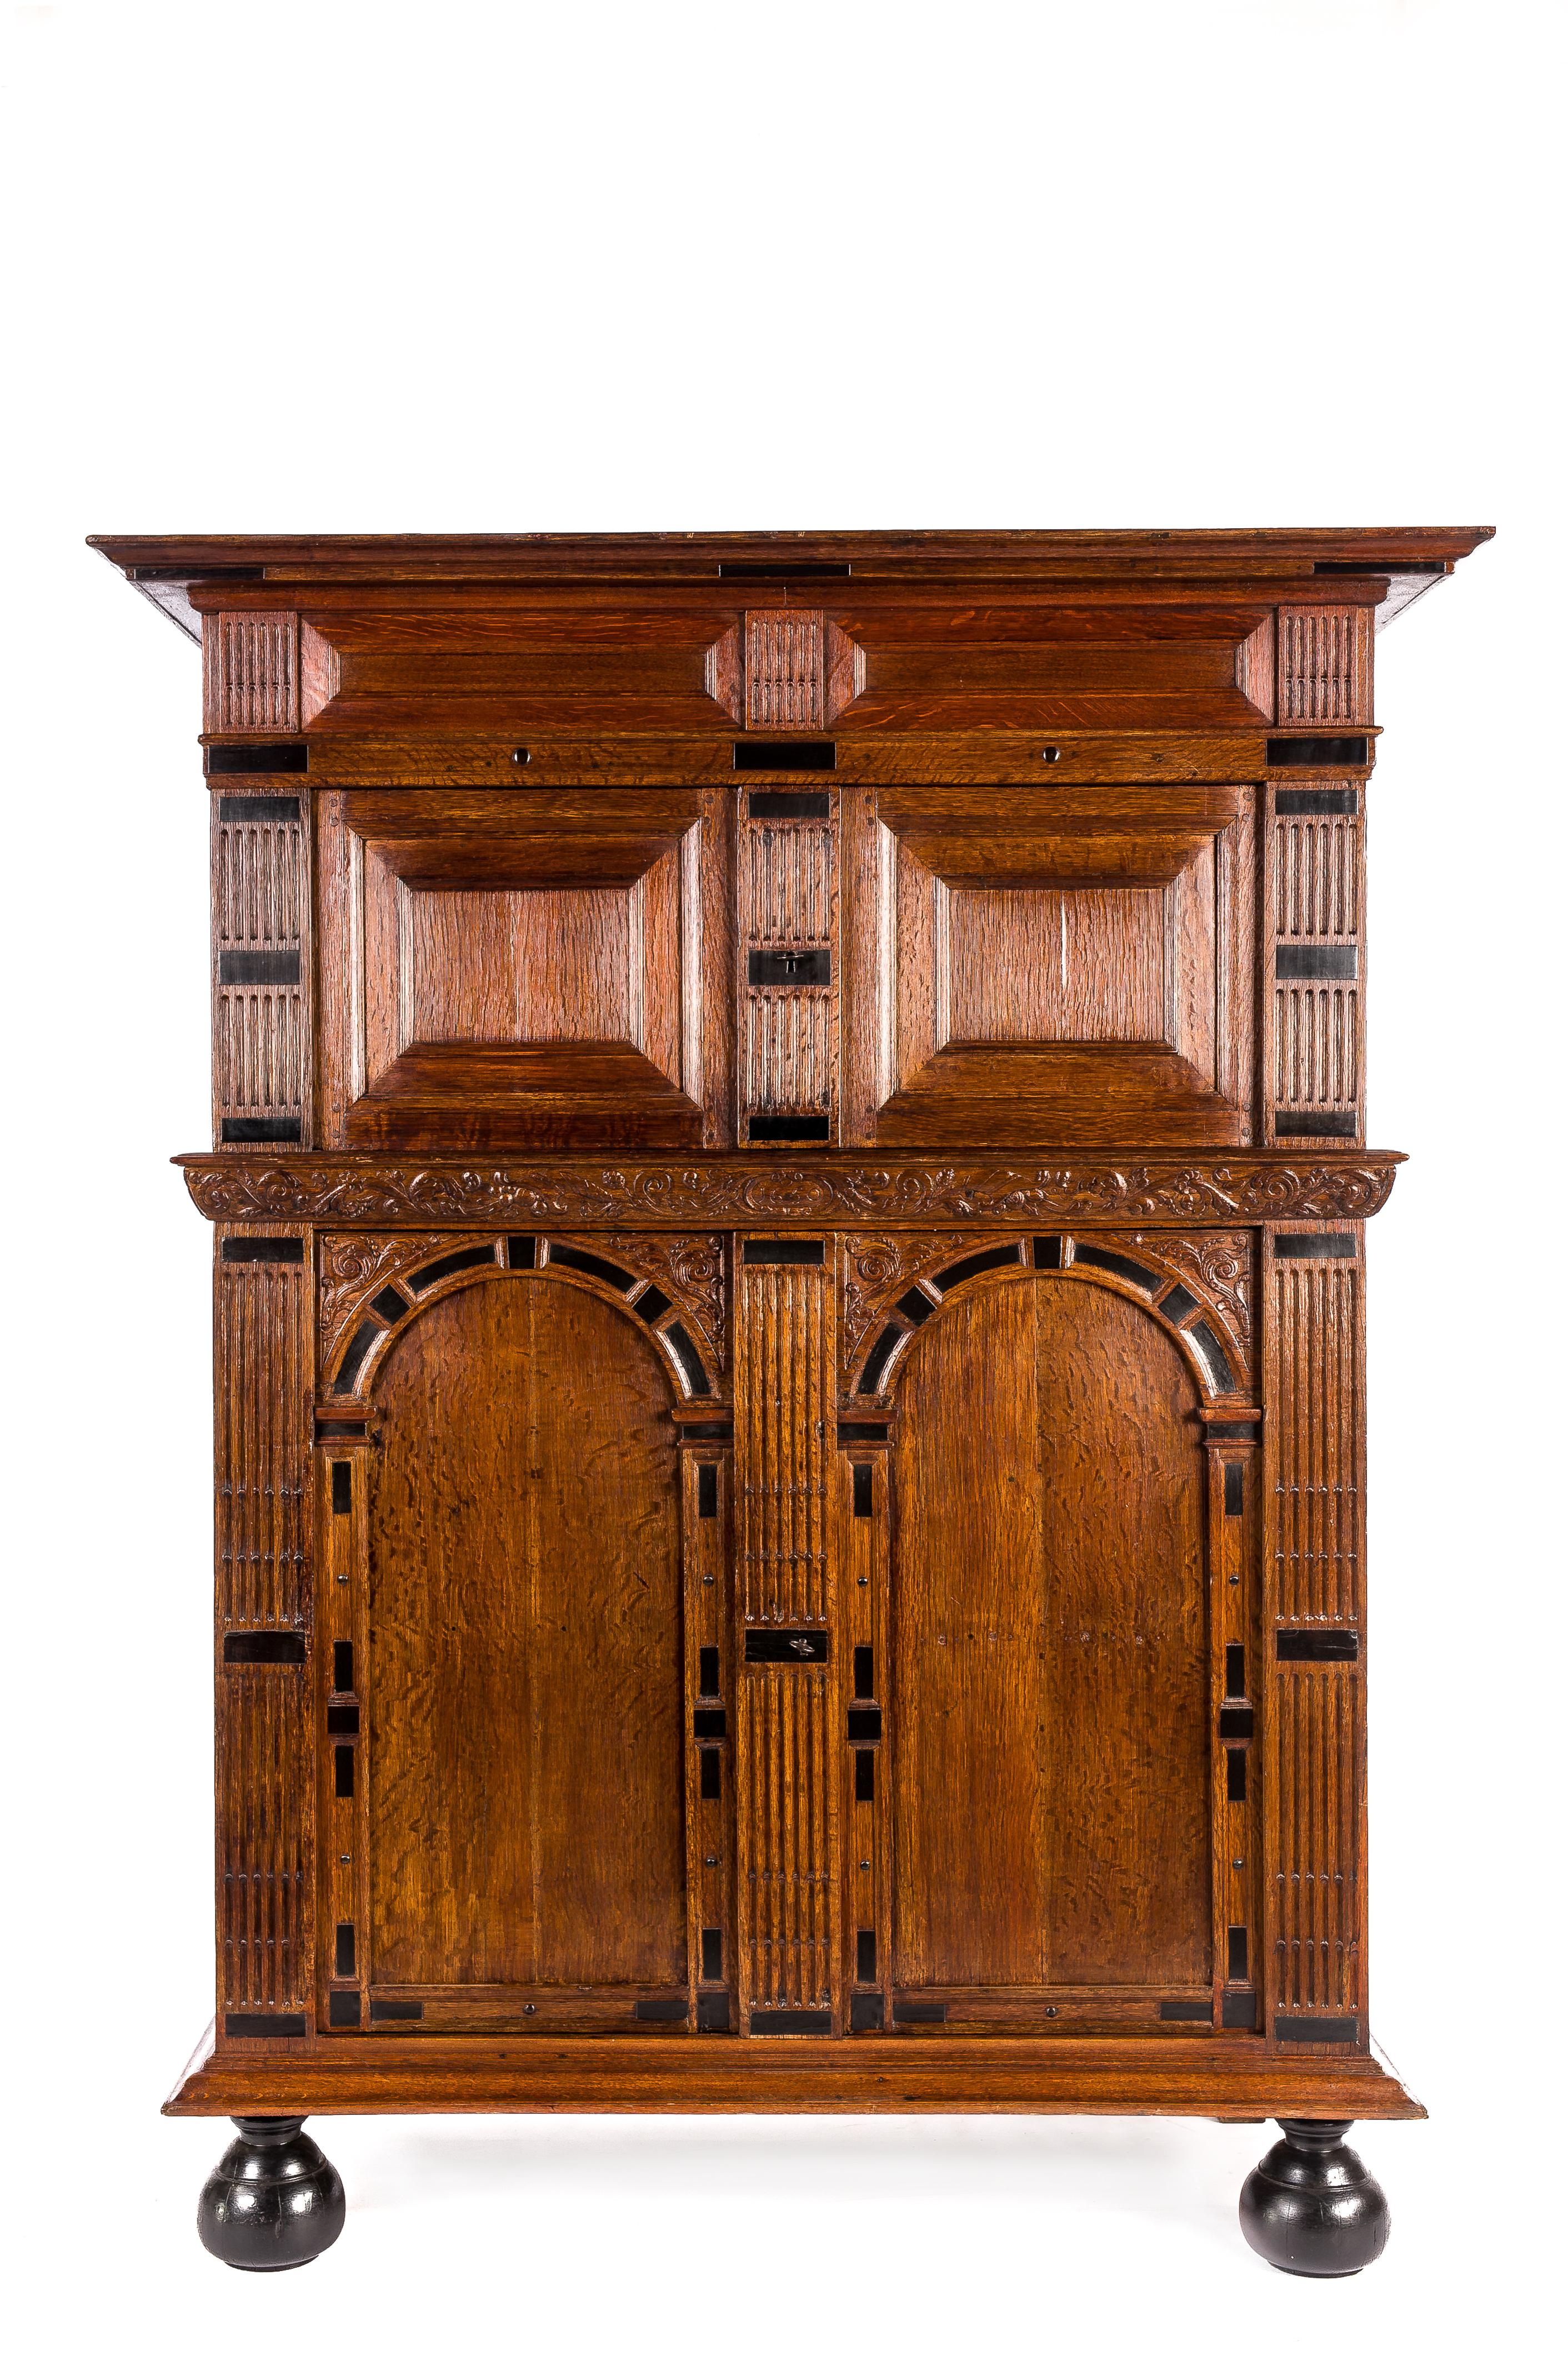 This extraordinary cabinet is made of the finest watered oak in the tradition of the Dutch Renaissance during the “Dutch golden age” 
It is a four-door cabinet made in the Provence of Utrecht in 1660 as is dated on the piece. The arched doors and